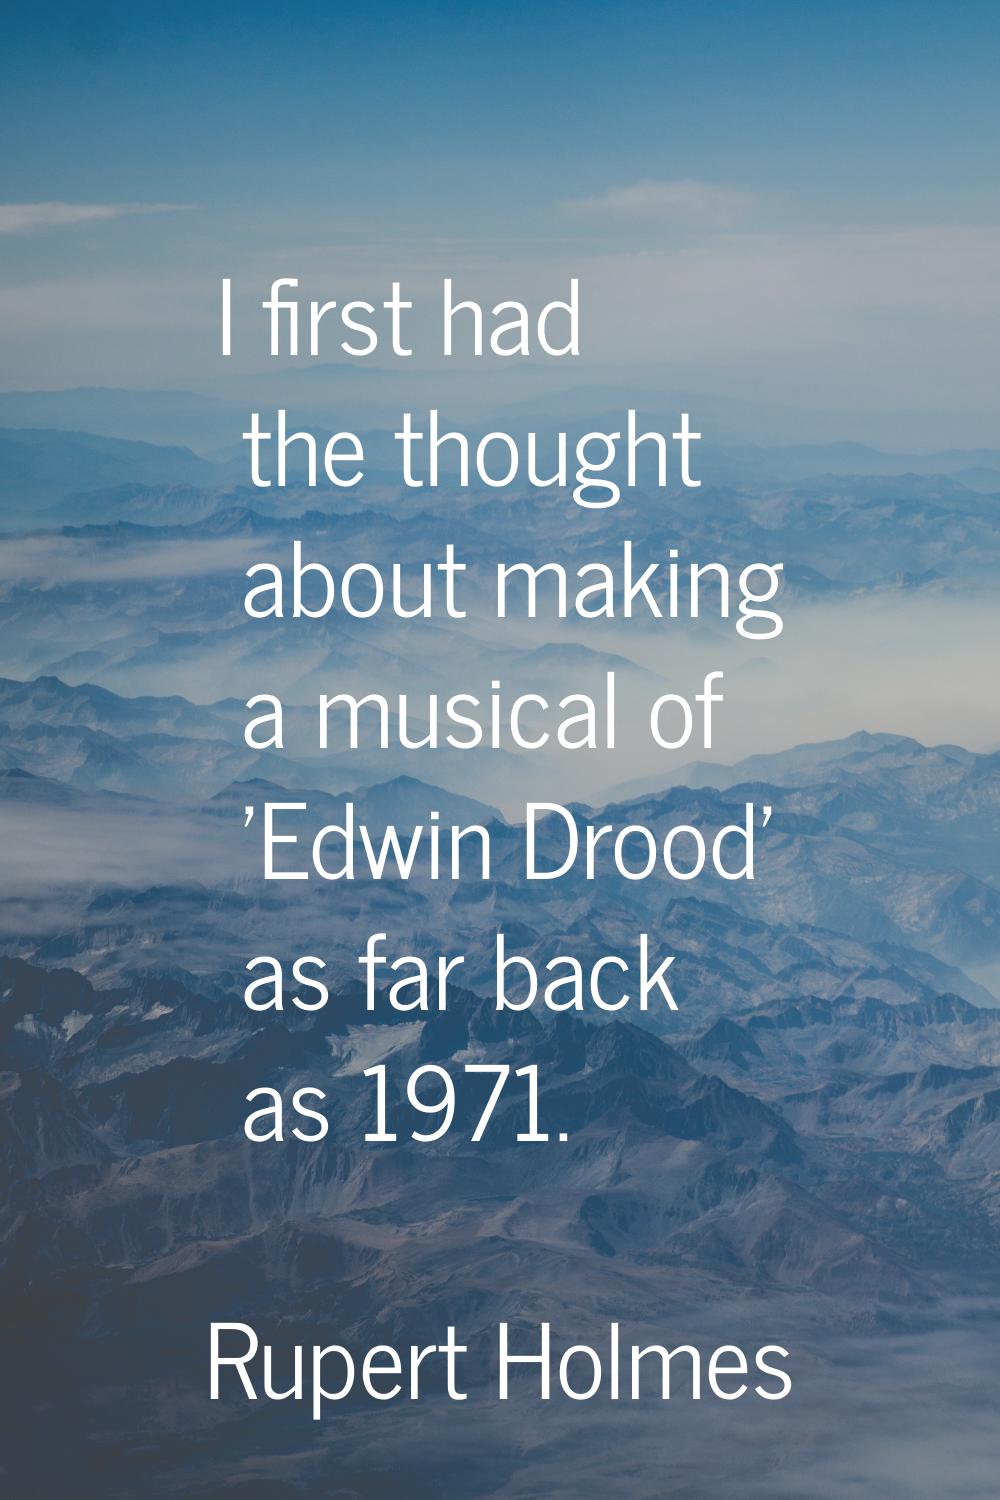 I first had the thought about making a musical of 'Edwin Drood' as far back as 1971.